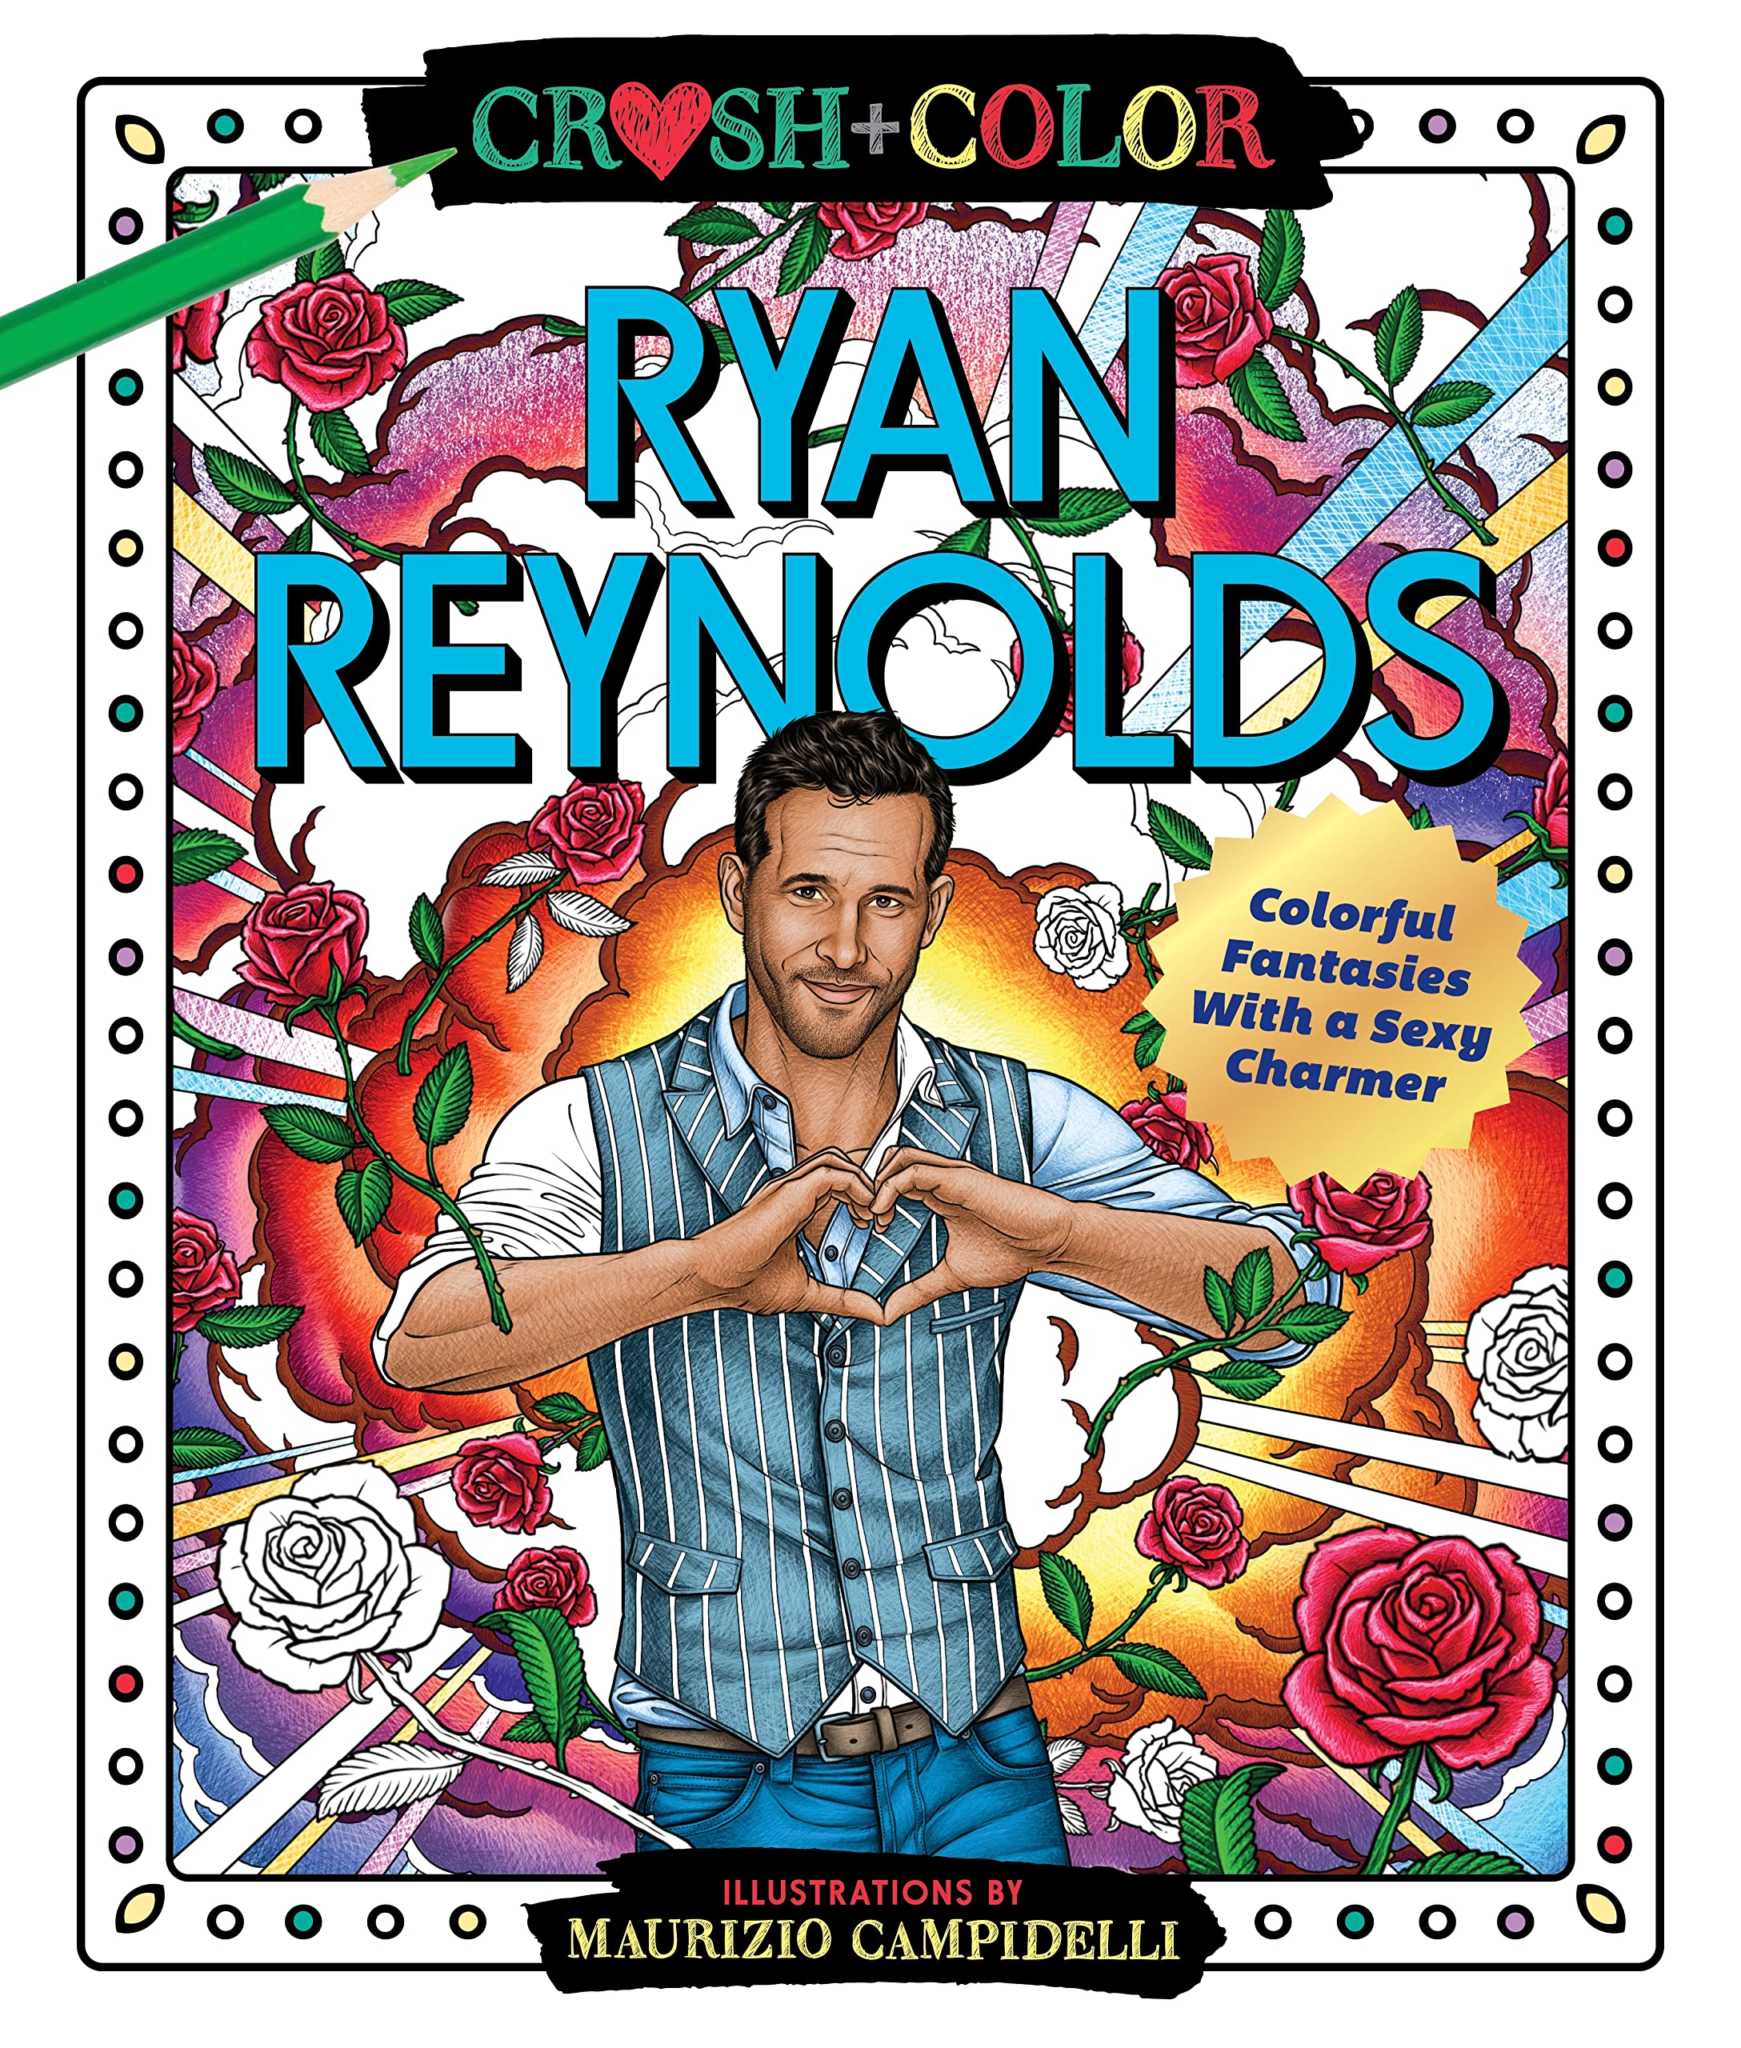 Quench Your Ryan Reynolds Thirst with this Coloring Book